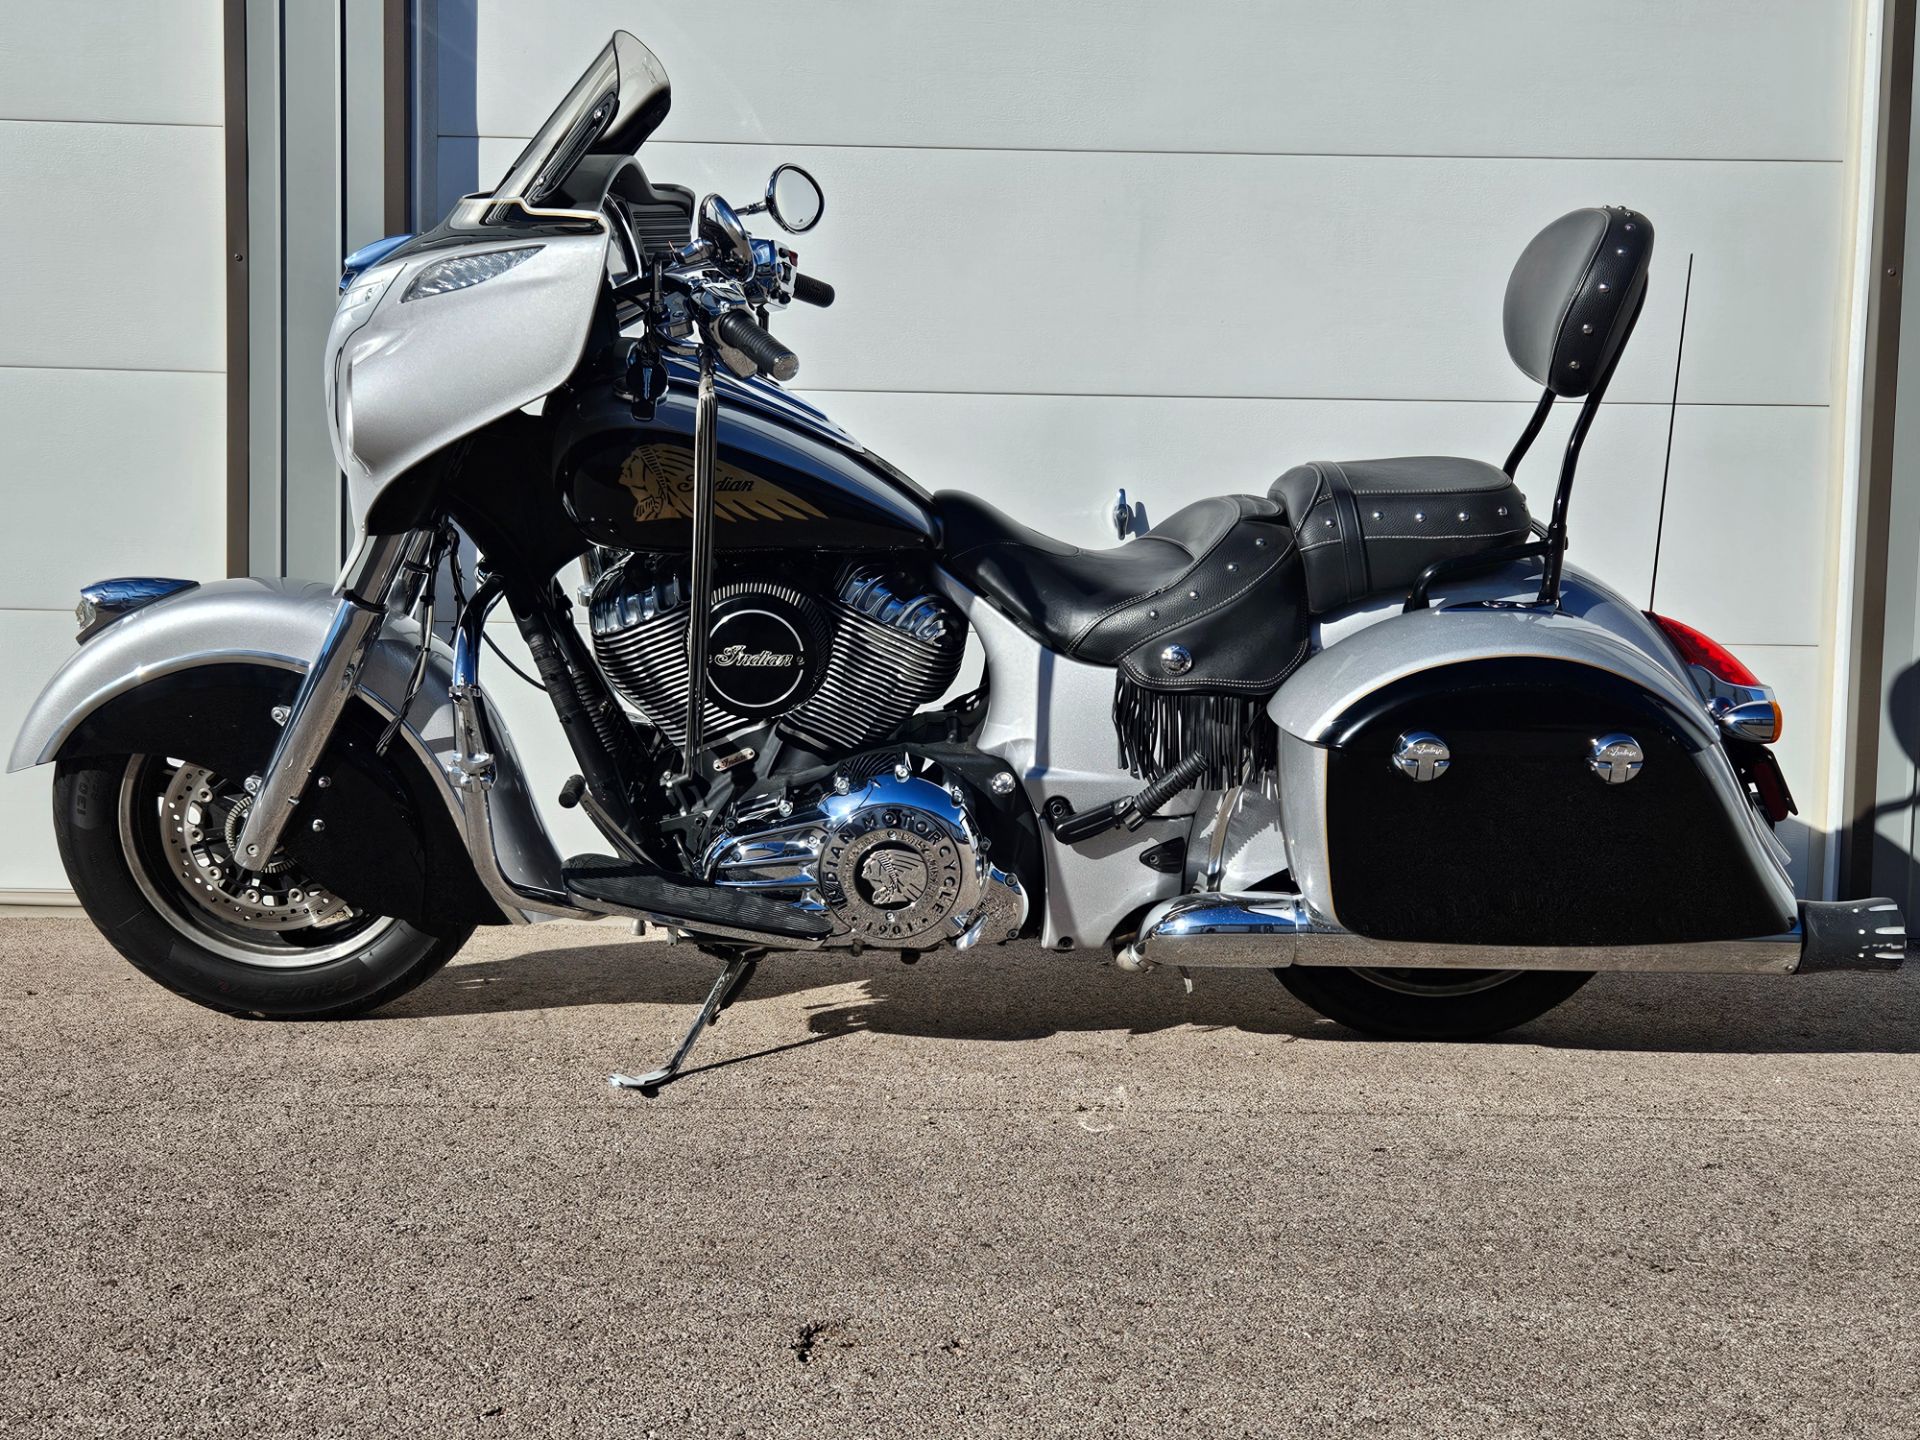 Indian Chieftain Image